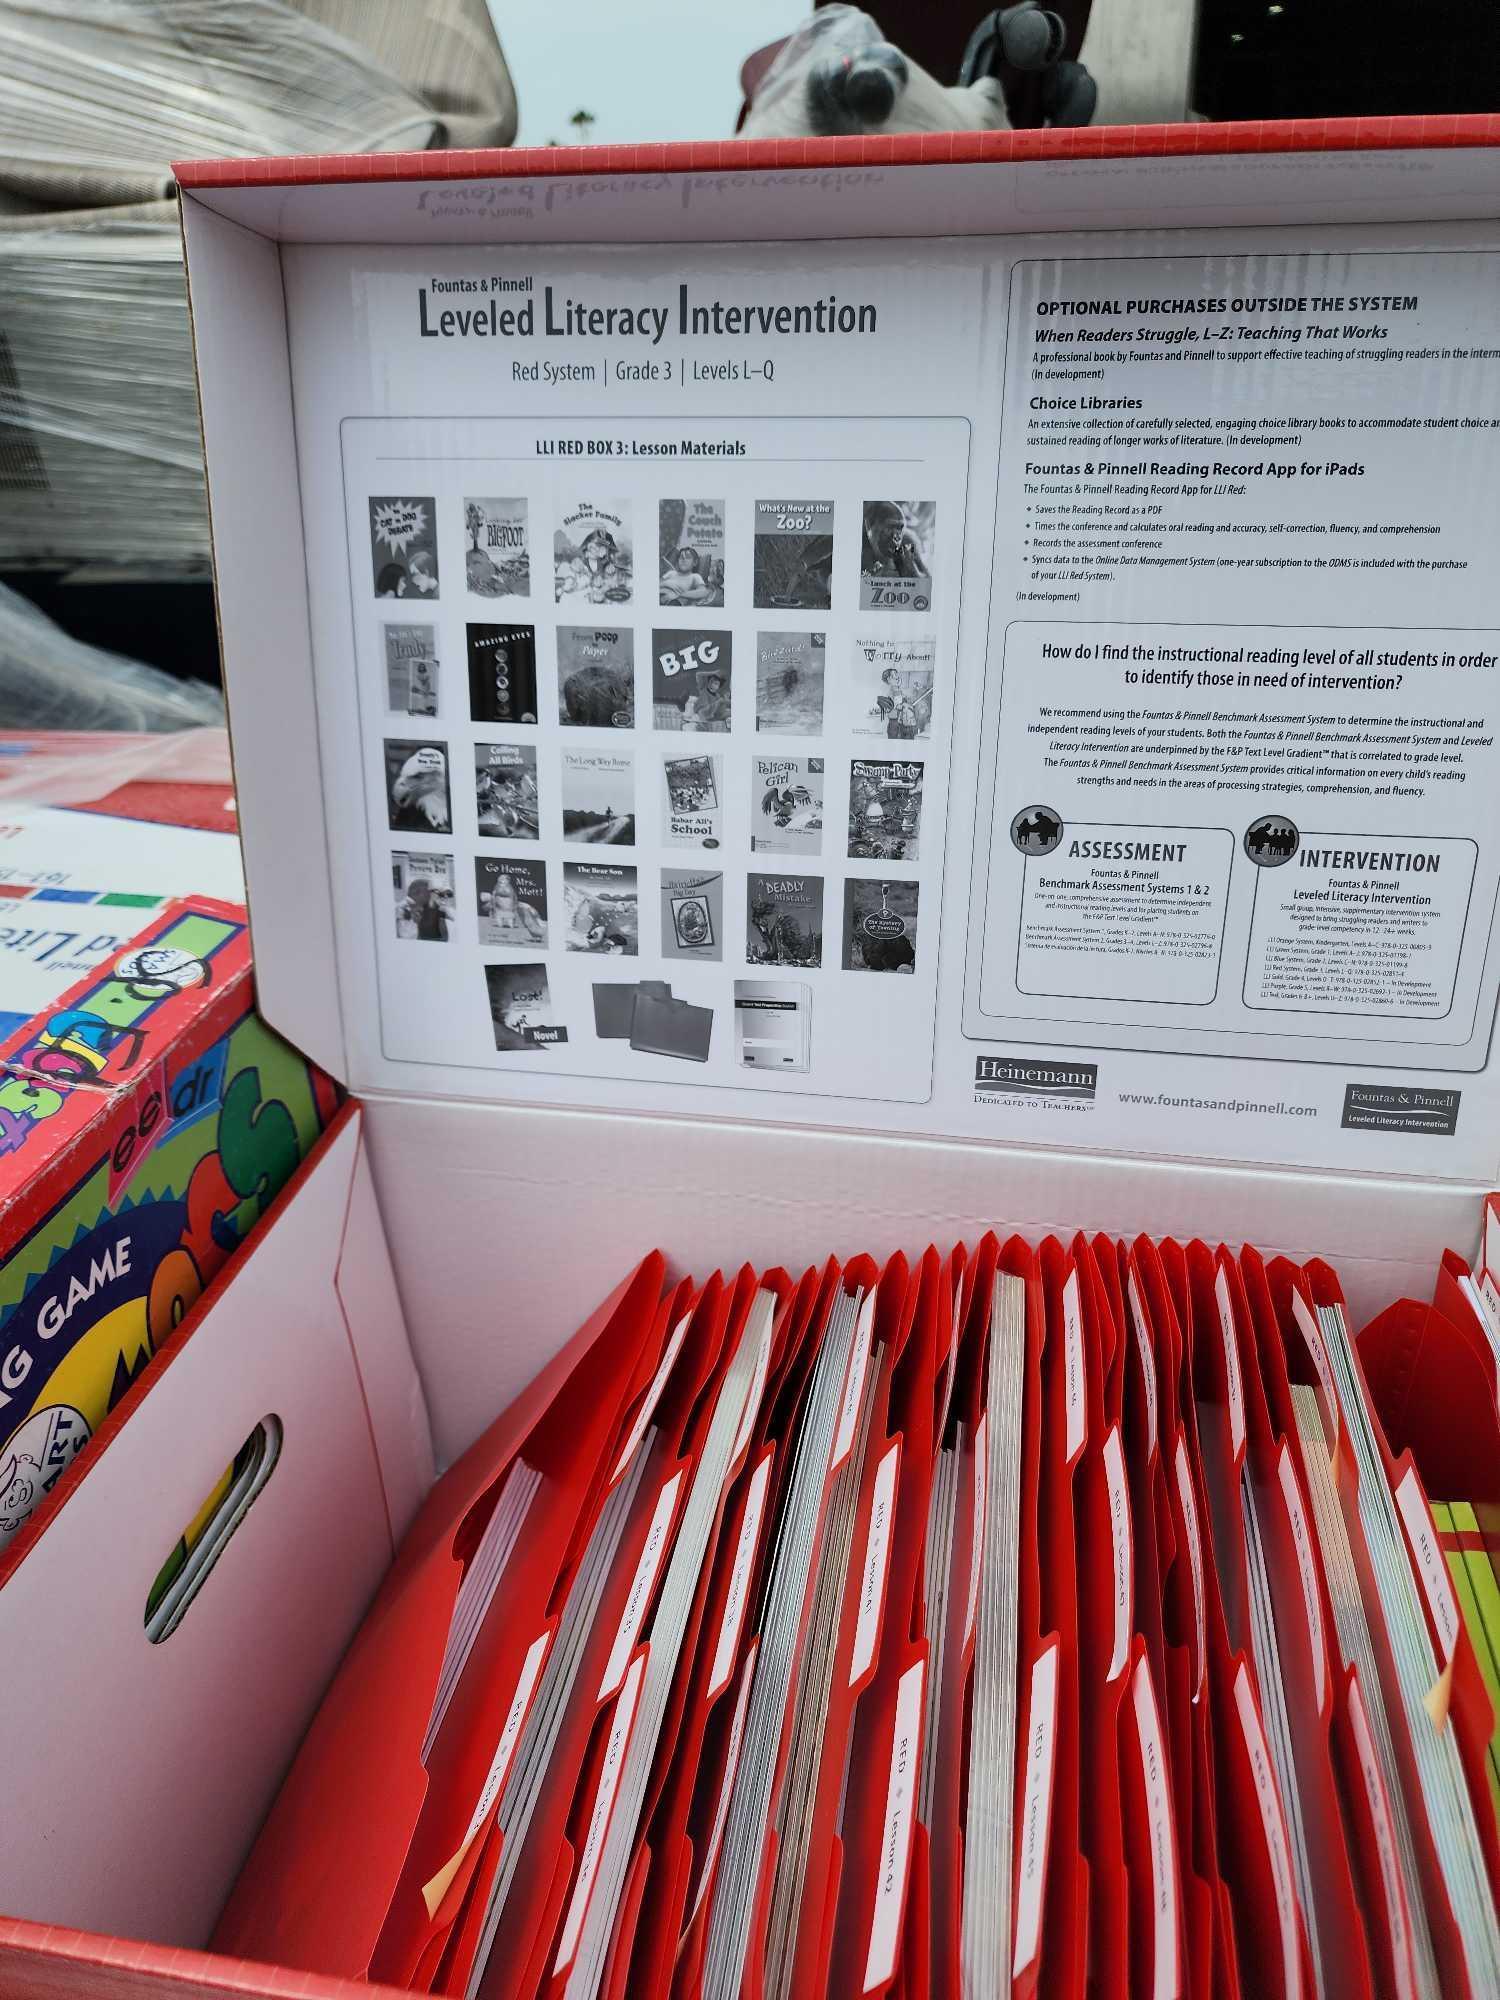 (4) Boxes of Leveled Literacy Intervention for Grade 3, Student Books, Children Toys